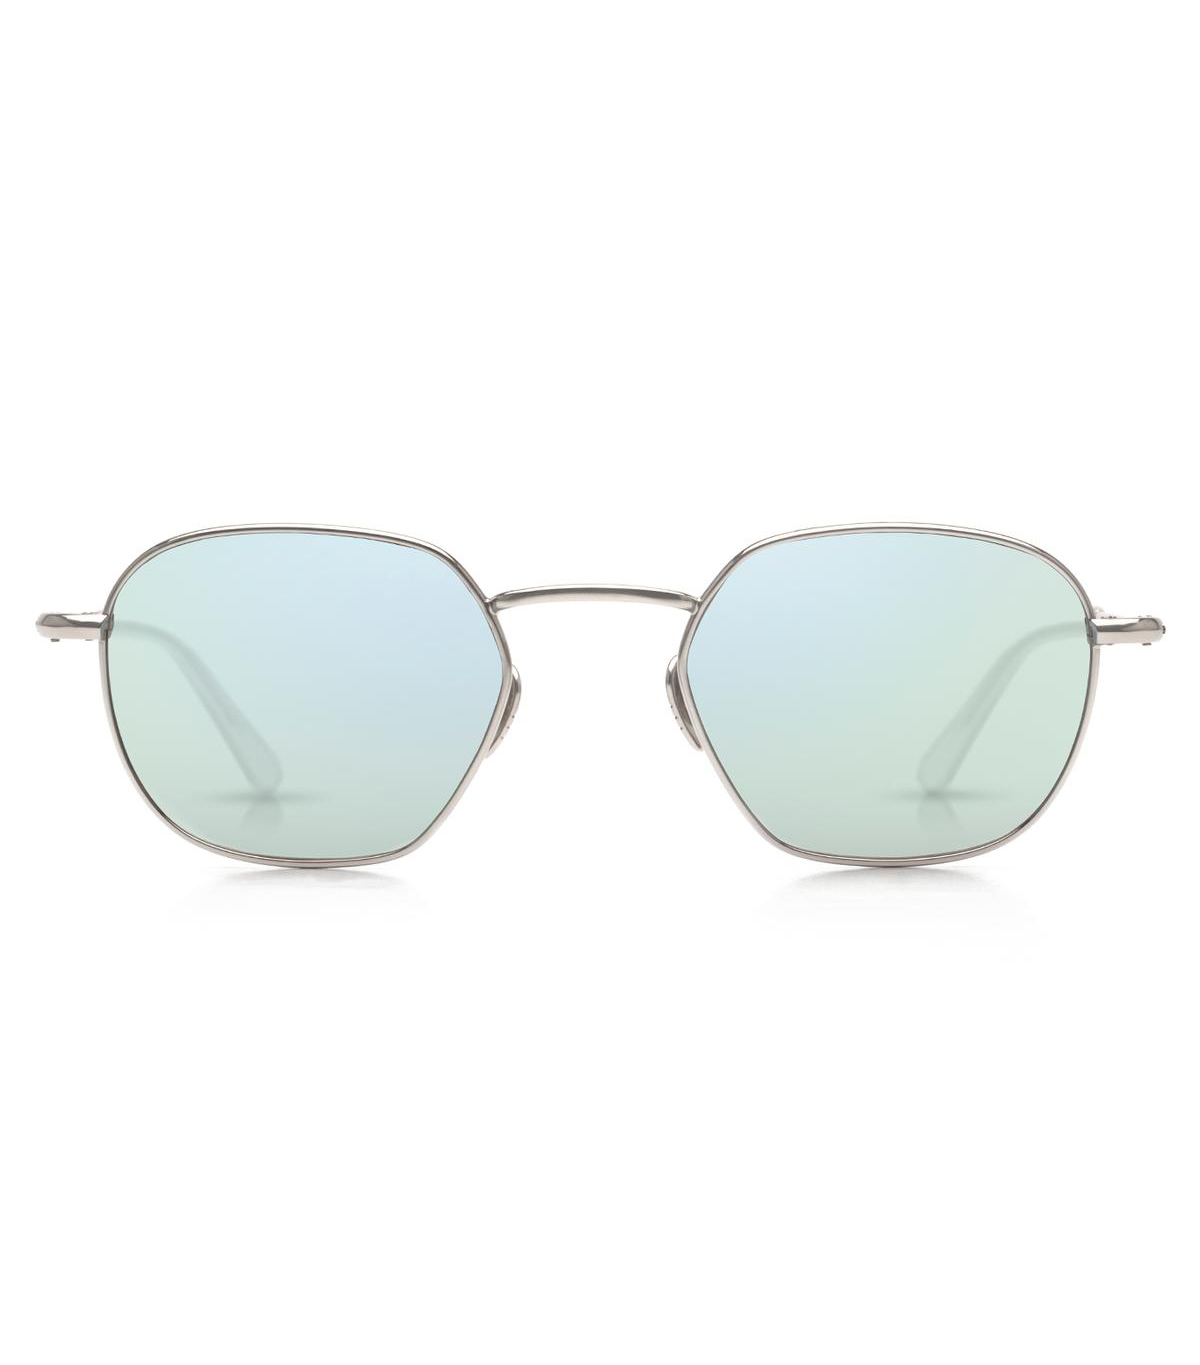 Shop the Classic Wire Frame Sunglasses Trend From Krewe | Who What Wear